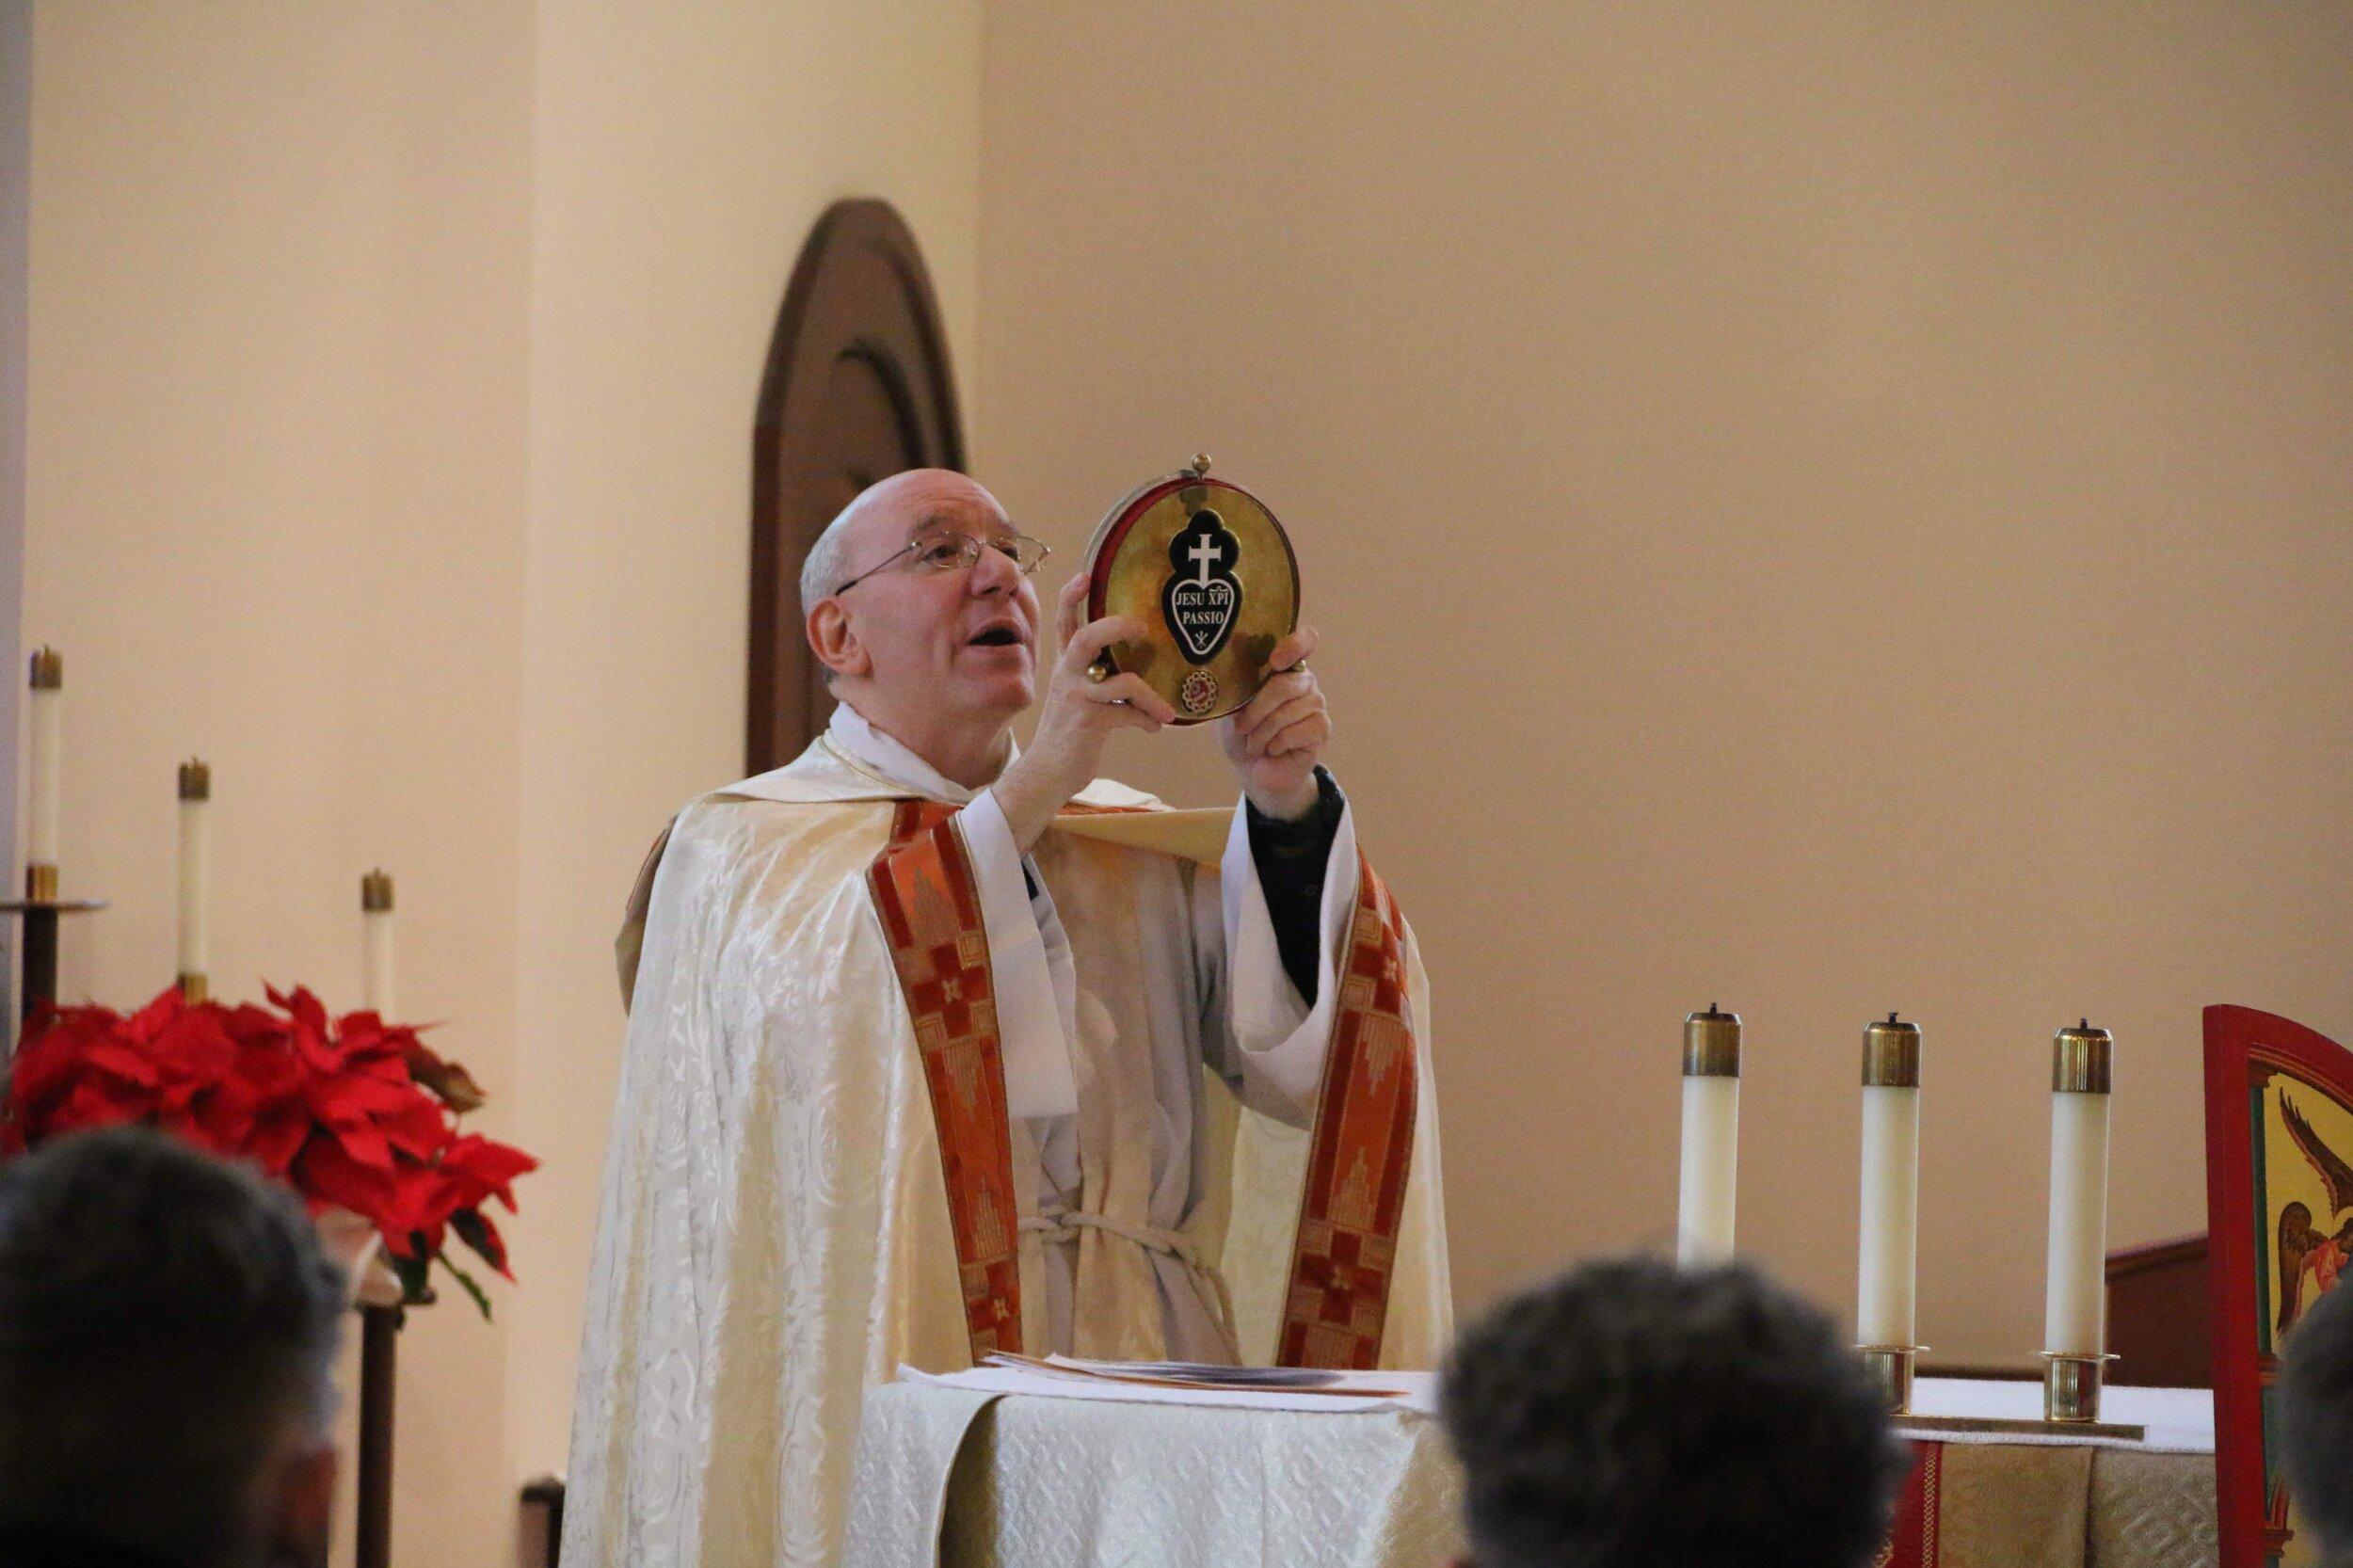  Fr. Lou Caporiccio, CPM, blesses the congregation with the relic of St. Paul of the Cross.   Photo courtesy of Elizabeth Wong Barnstead/WKC  